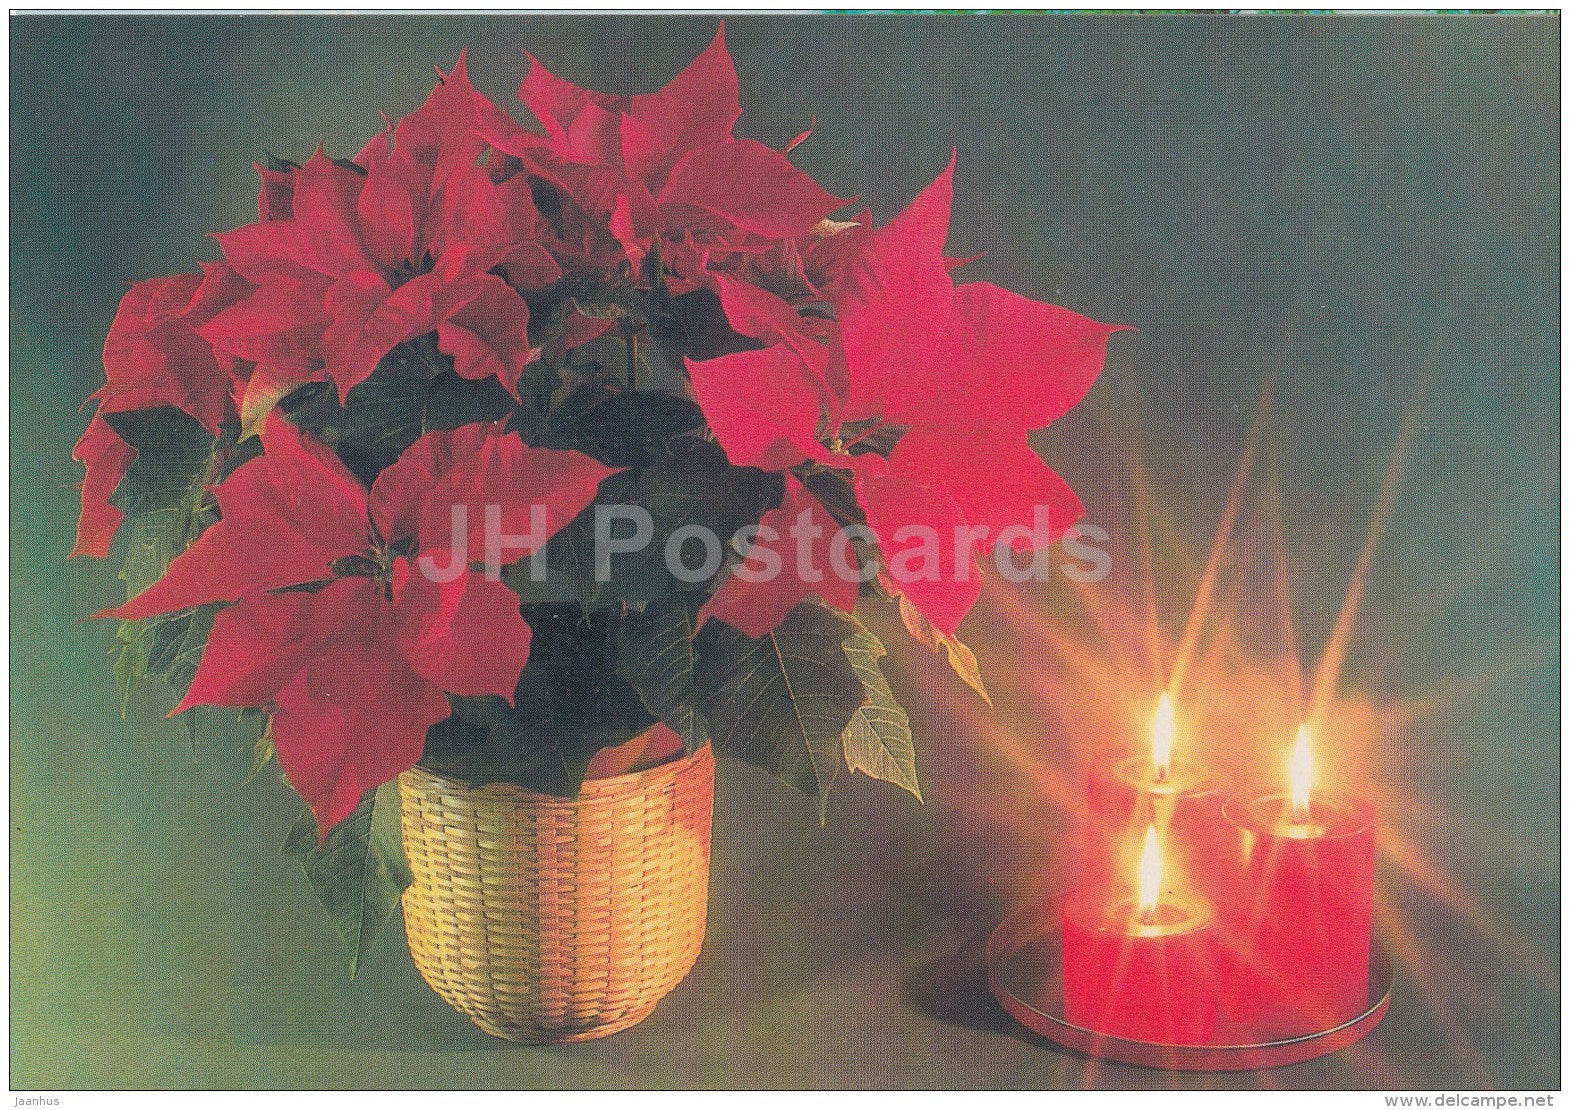 Christmas Greeting Card - candles - flower - Estonia - used in 1996 - JH Postcards